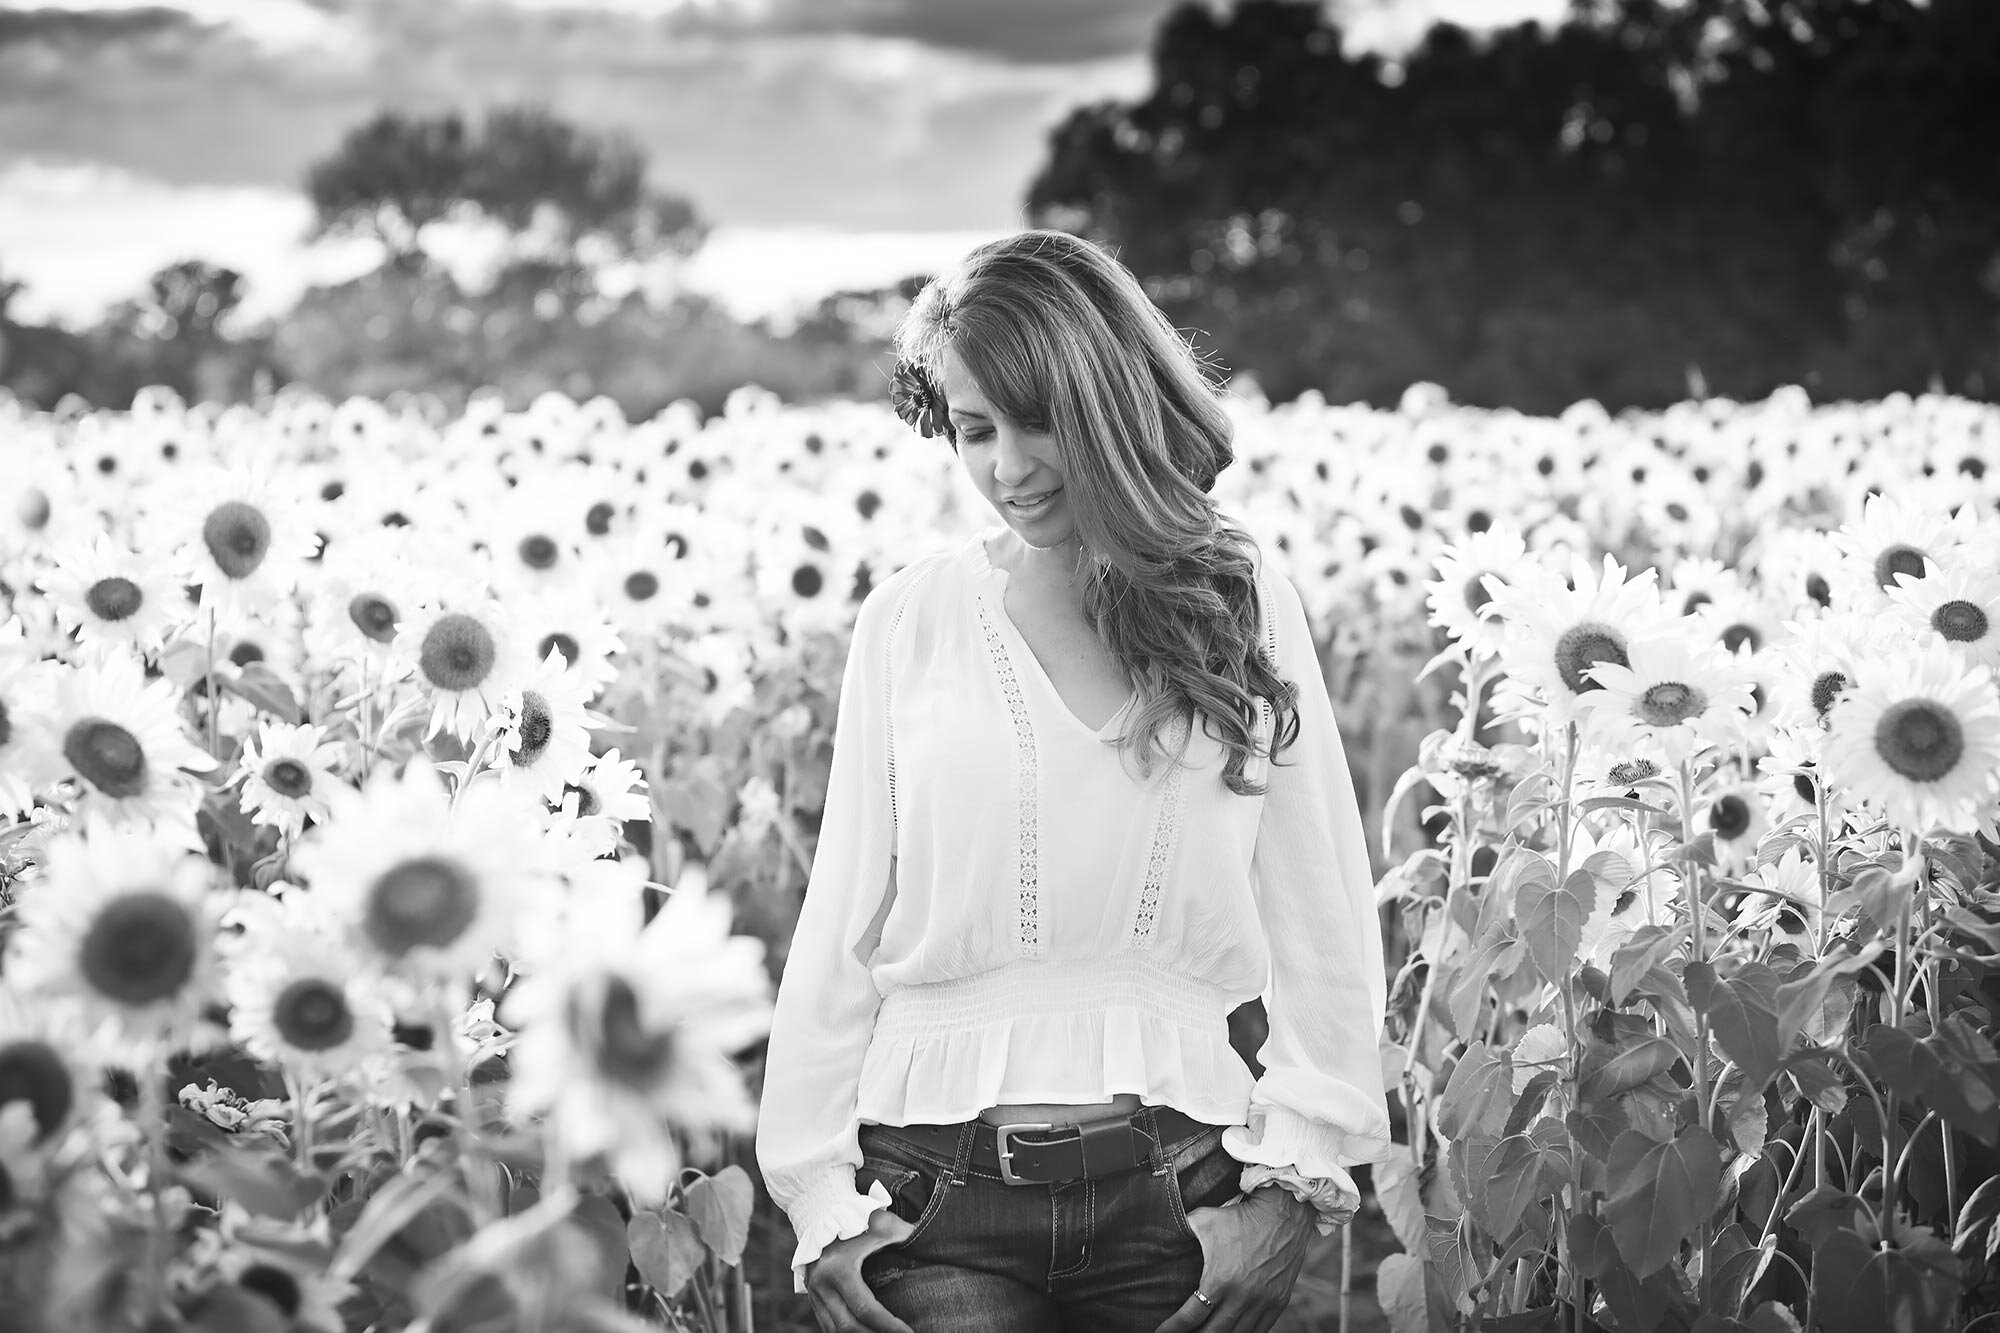 Colby Farm Sunflower Mini Session | Stephen Grant Photography